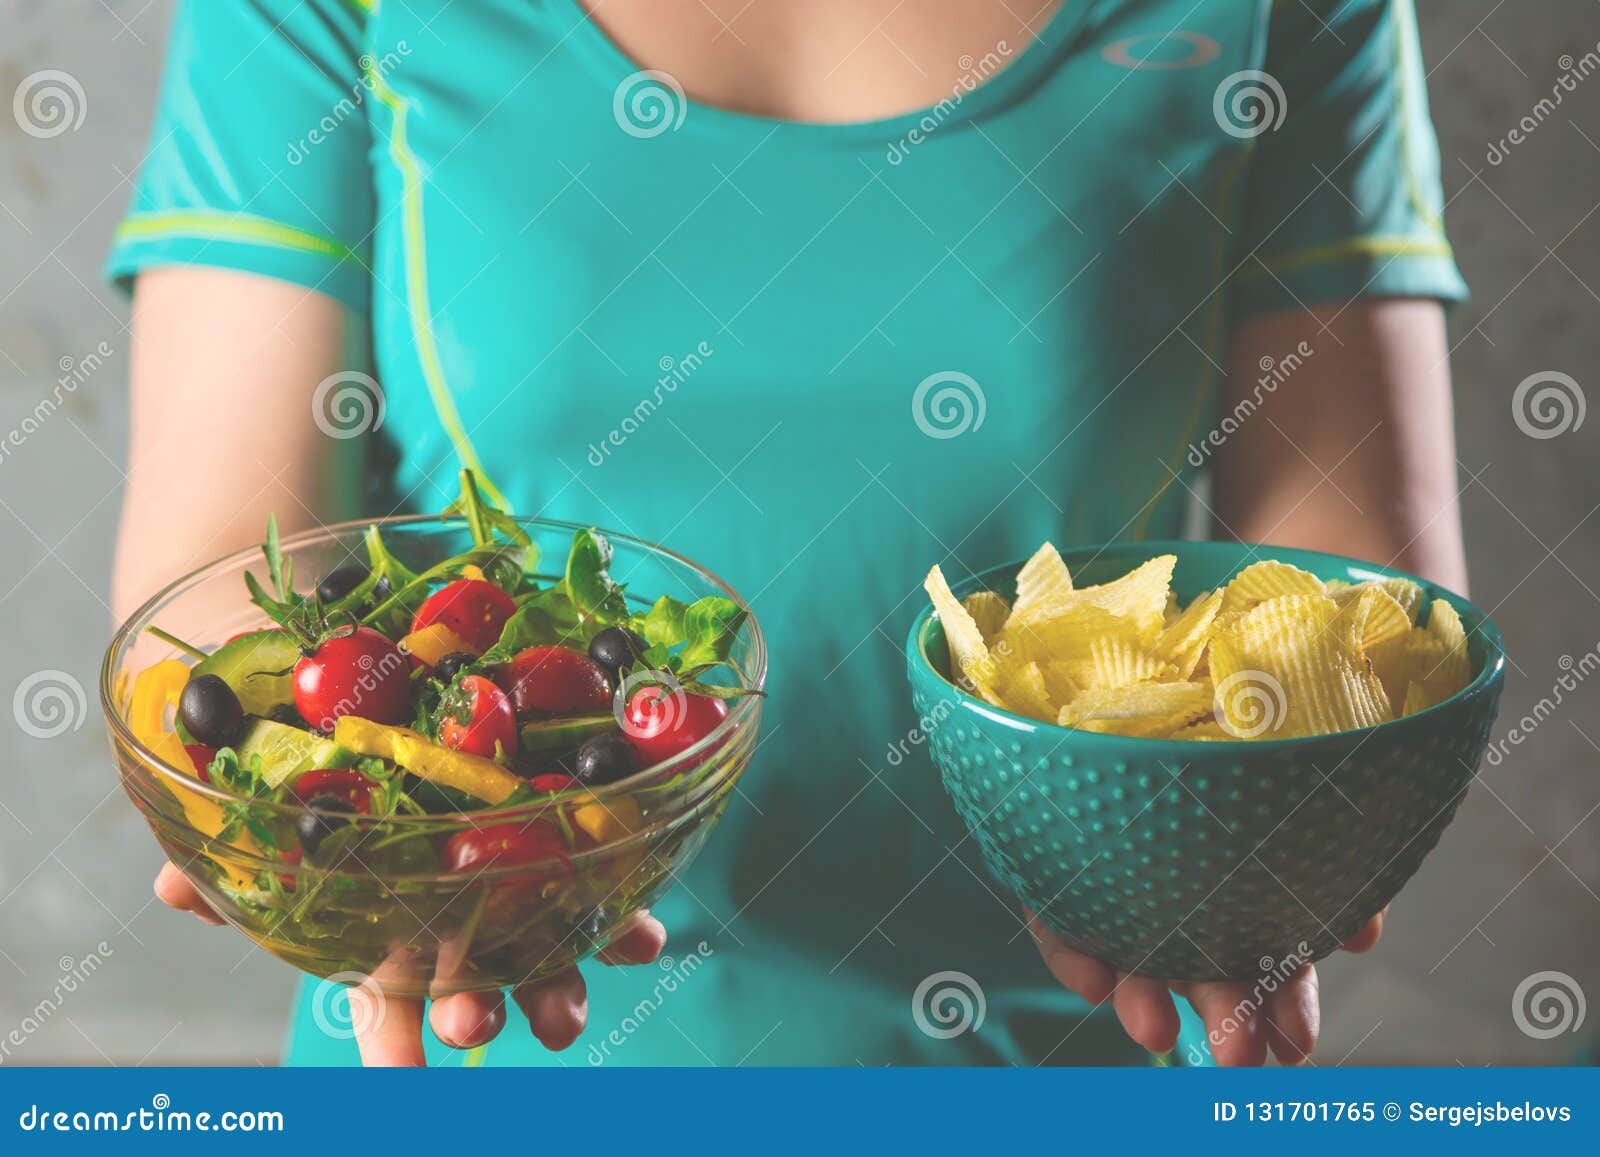 healthy young woman looking at healthy and unhealthy food, trying to make the right choice